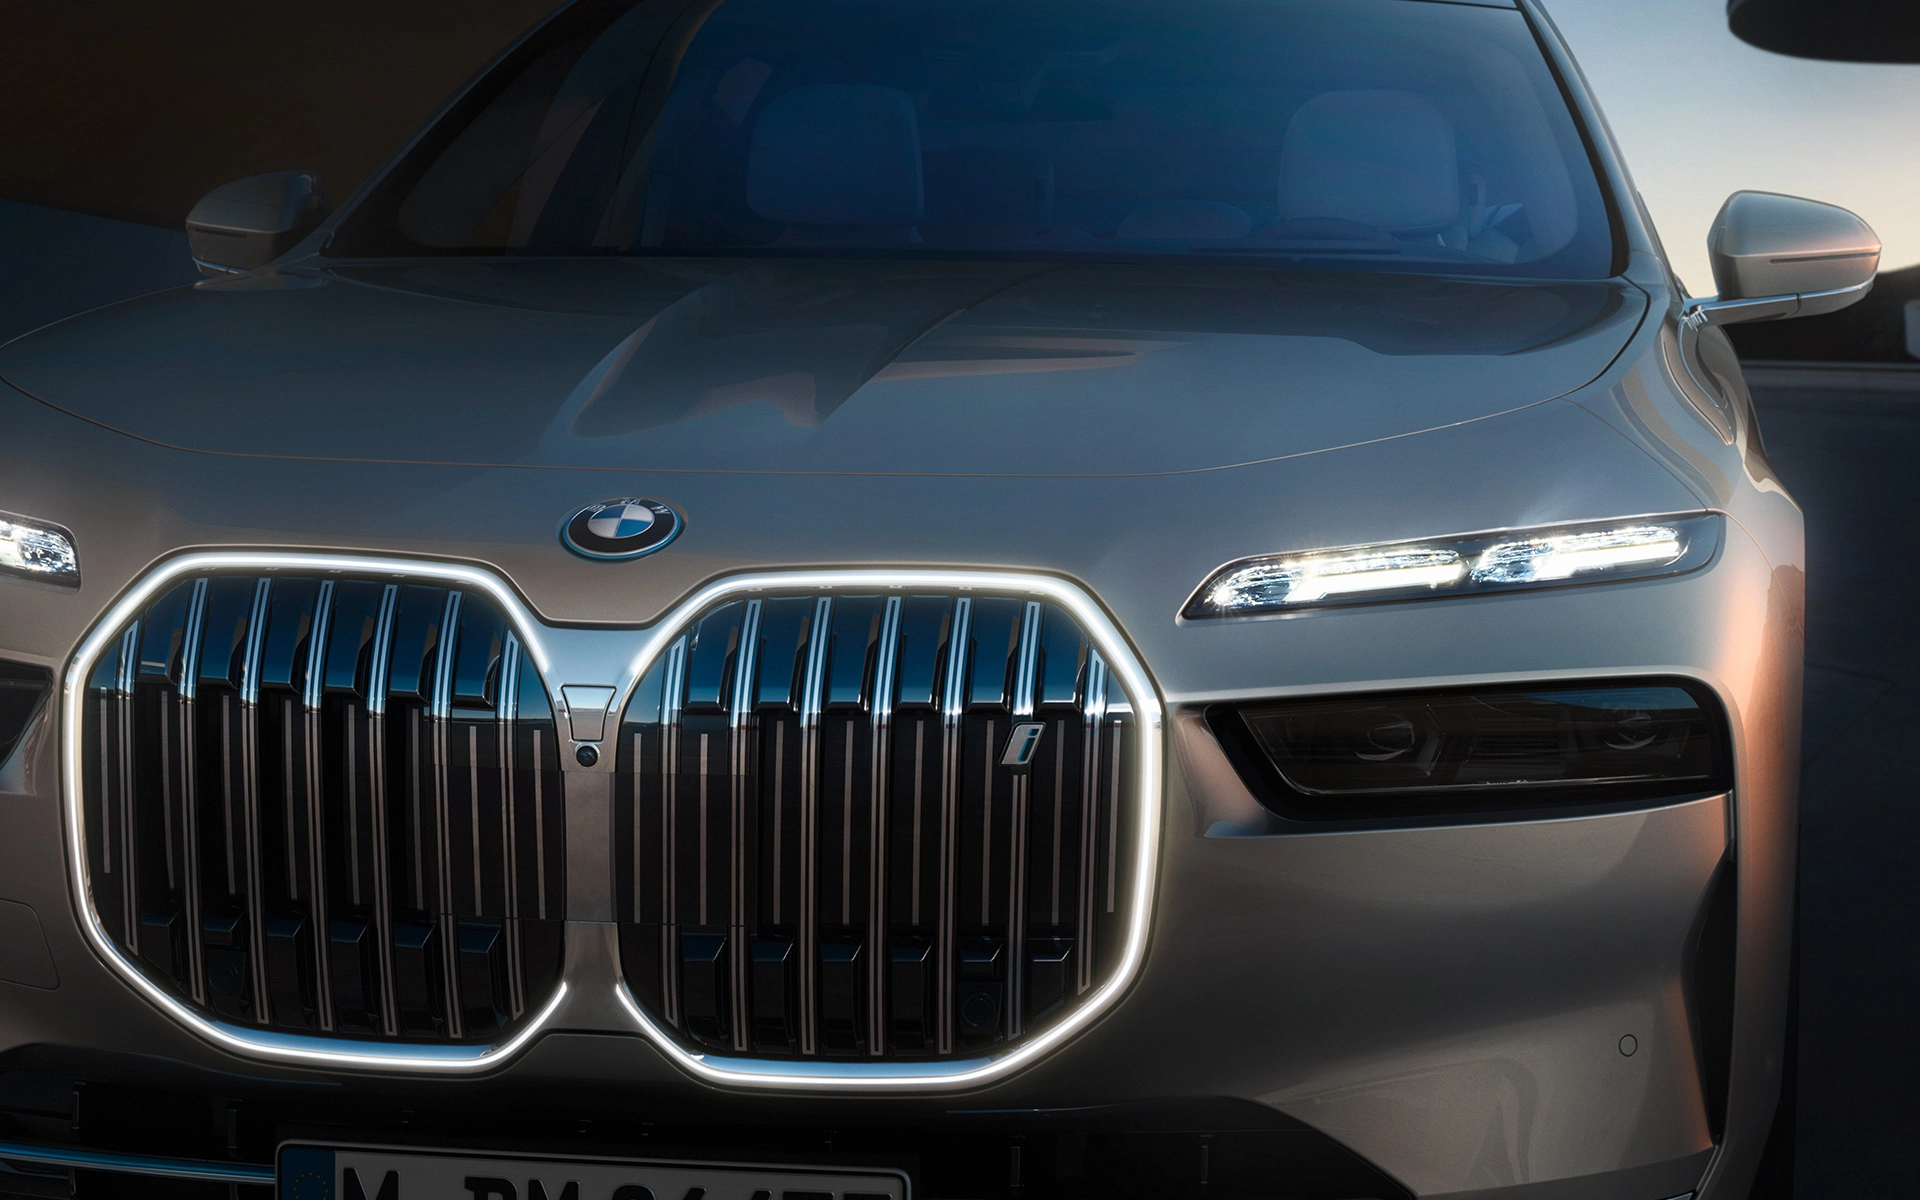 grey bmw i7 front view showing headlights with swarovski crystals and front grille with iconic glow